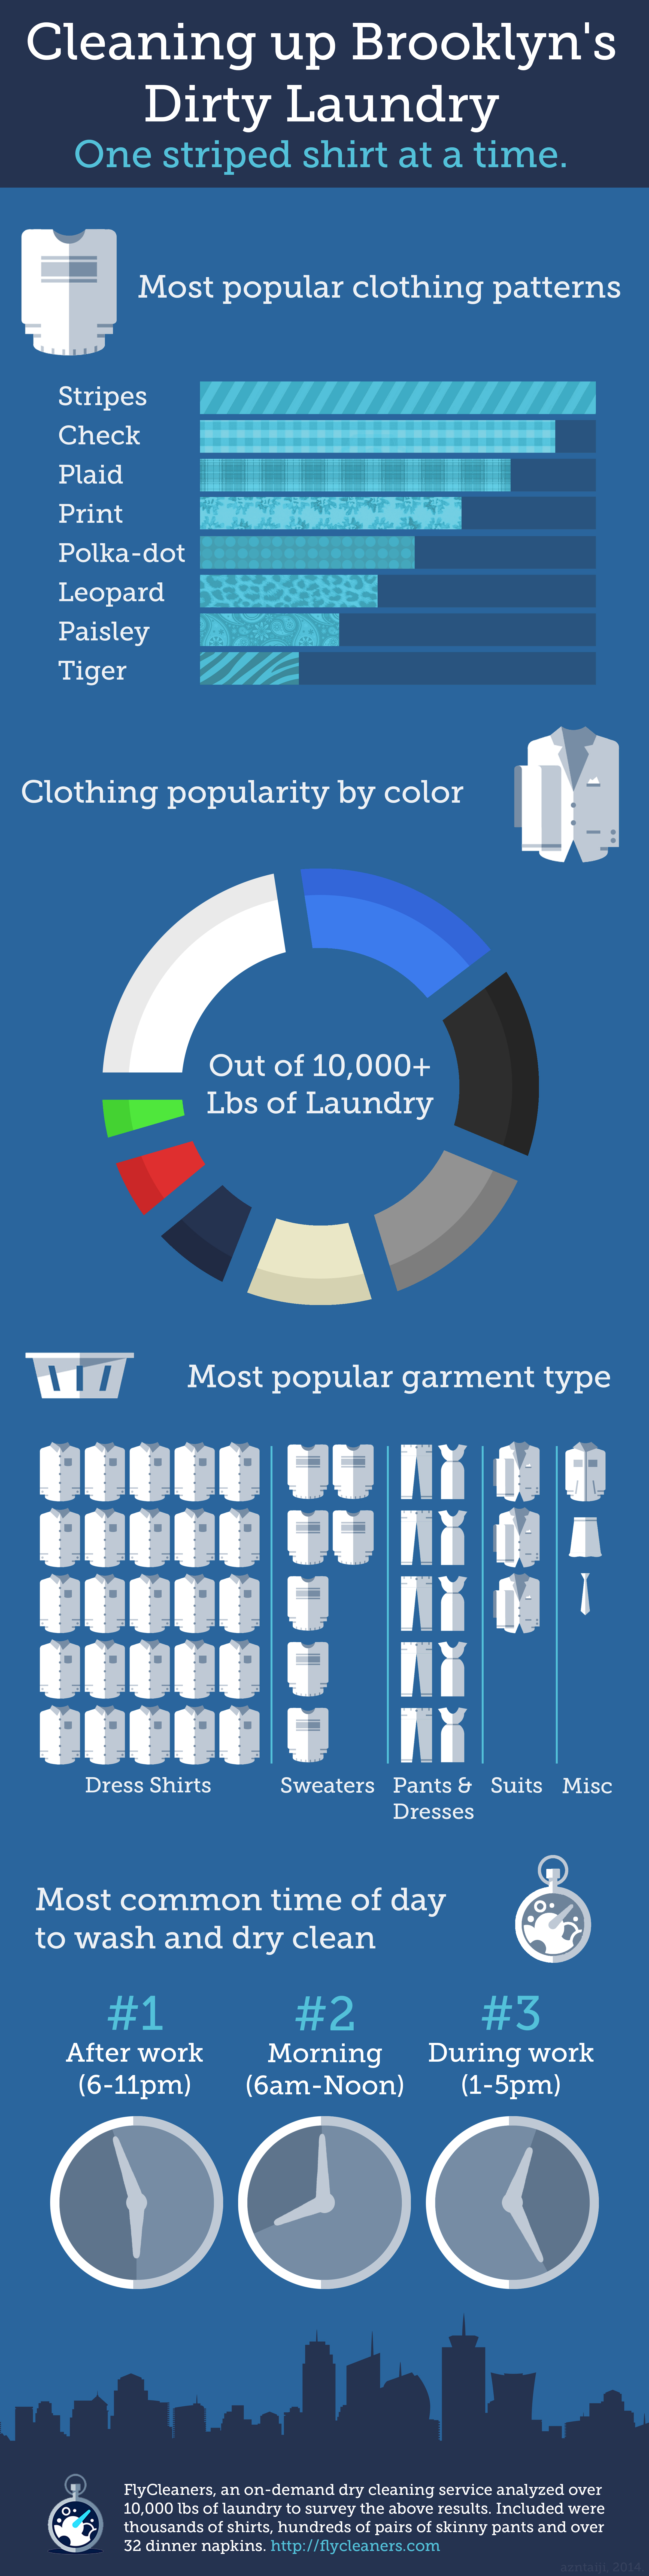 flycleaners-infographic-v2